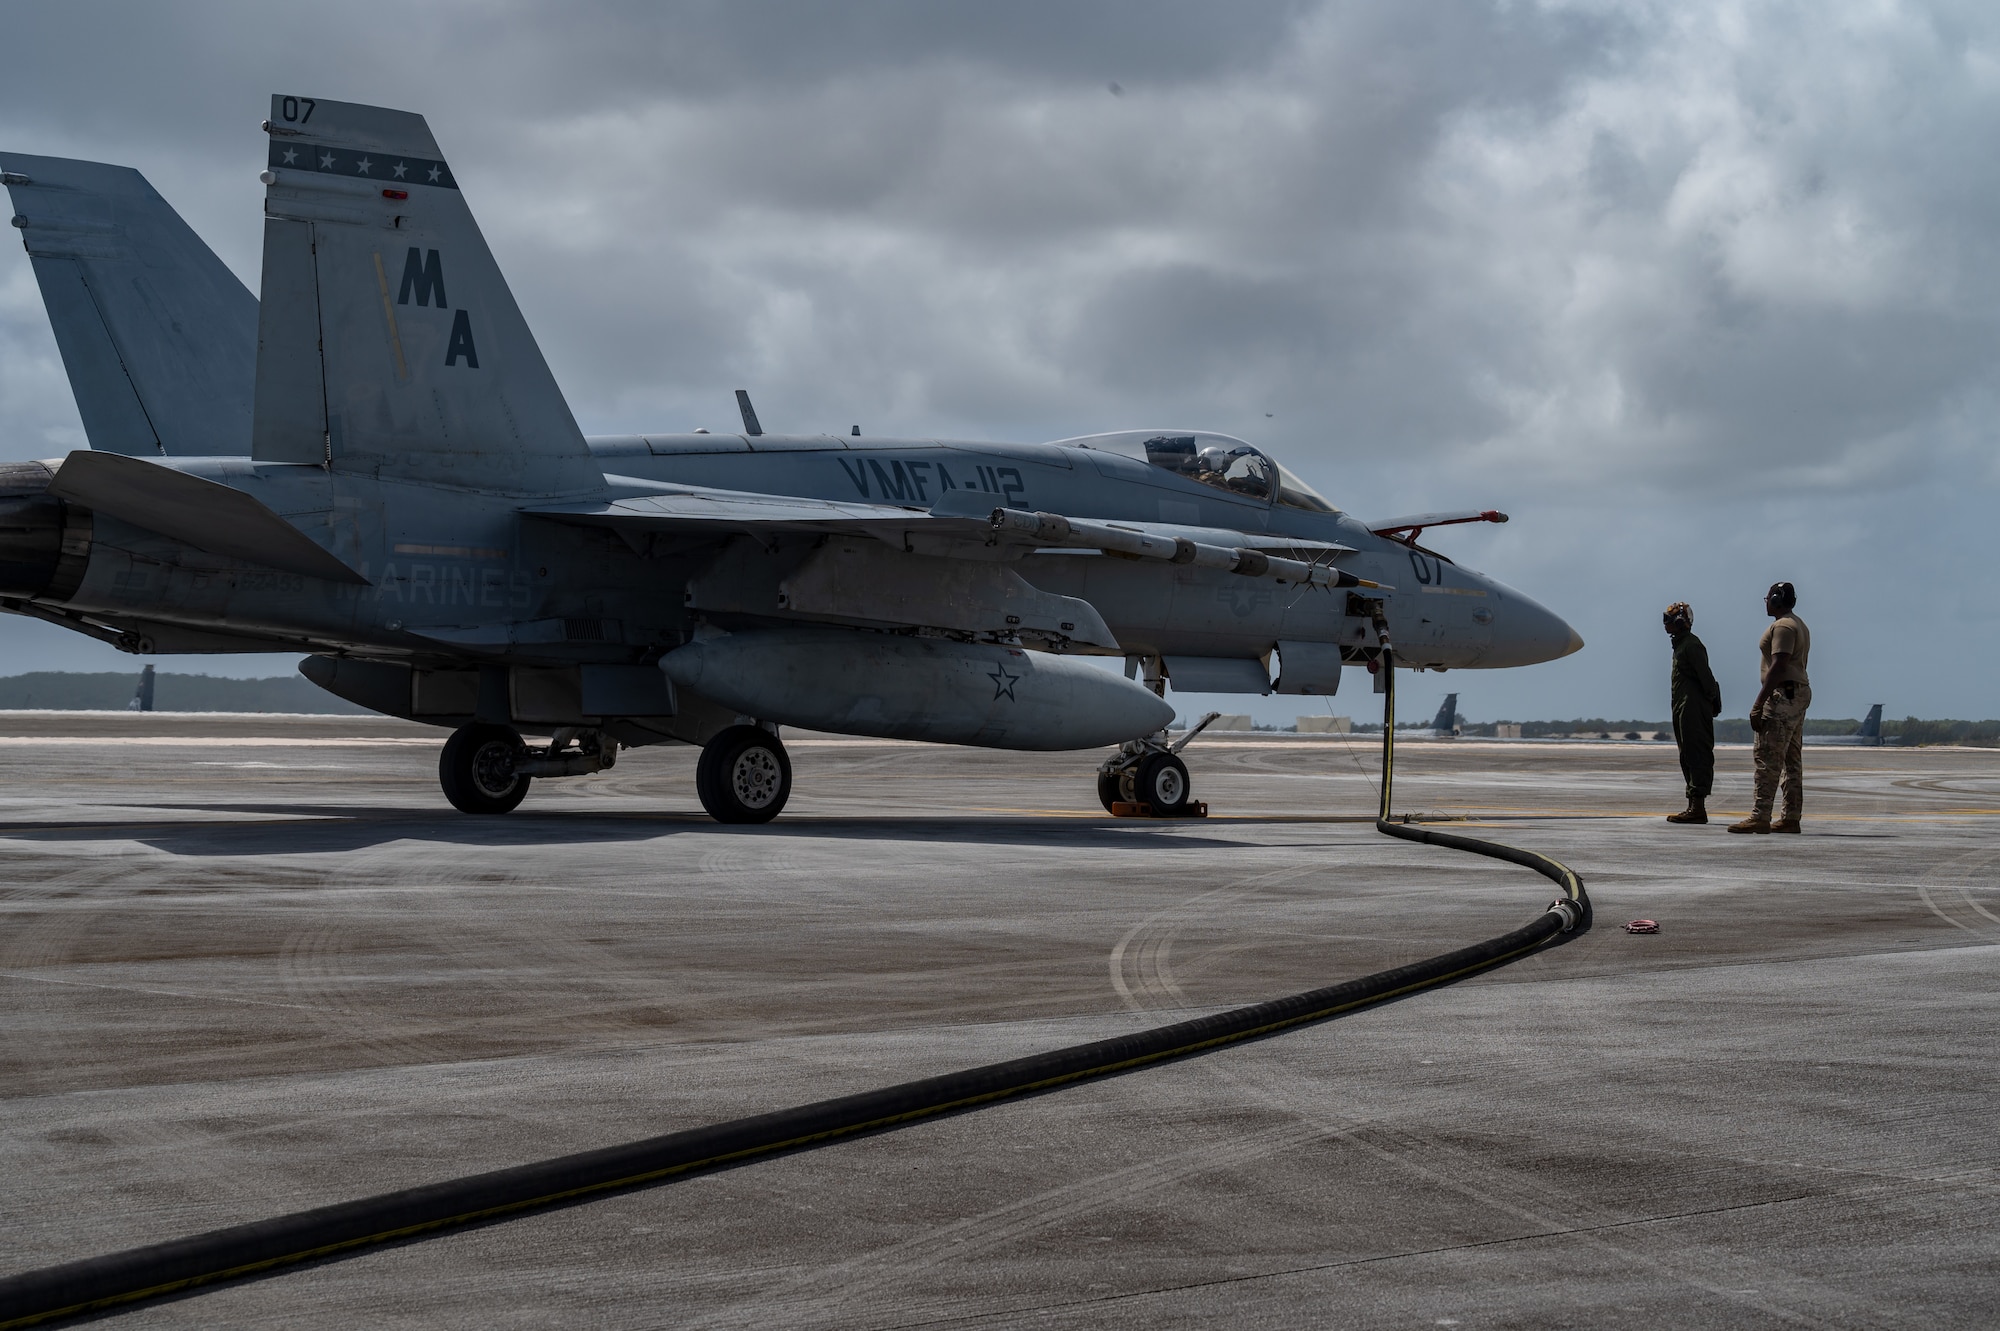 A Marine Fighter F/A-18C Hornet is being refueled during a hot-pit training exercise at Andersen Air Force Base, Guam, Feb. 14, 2022.